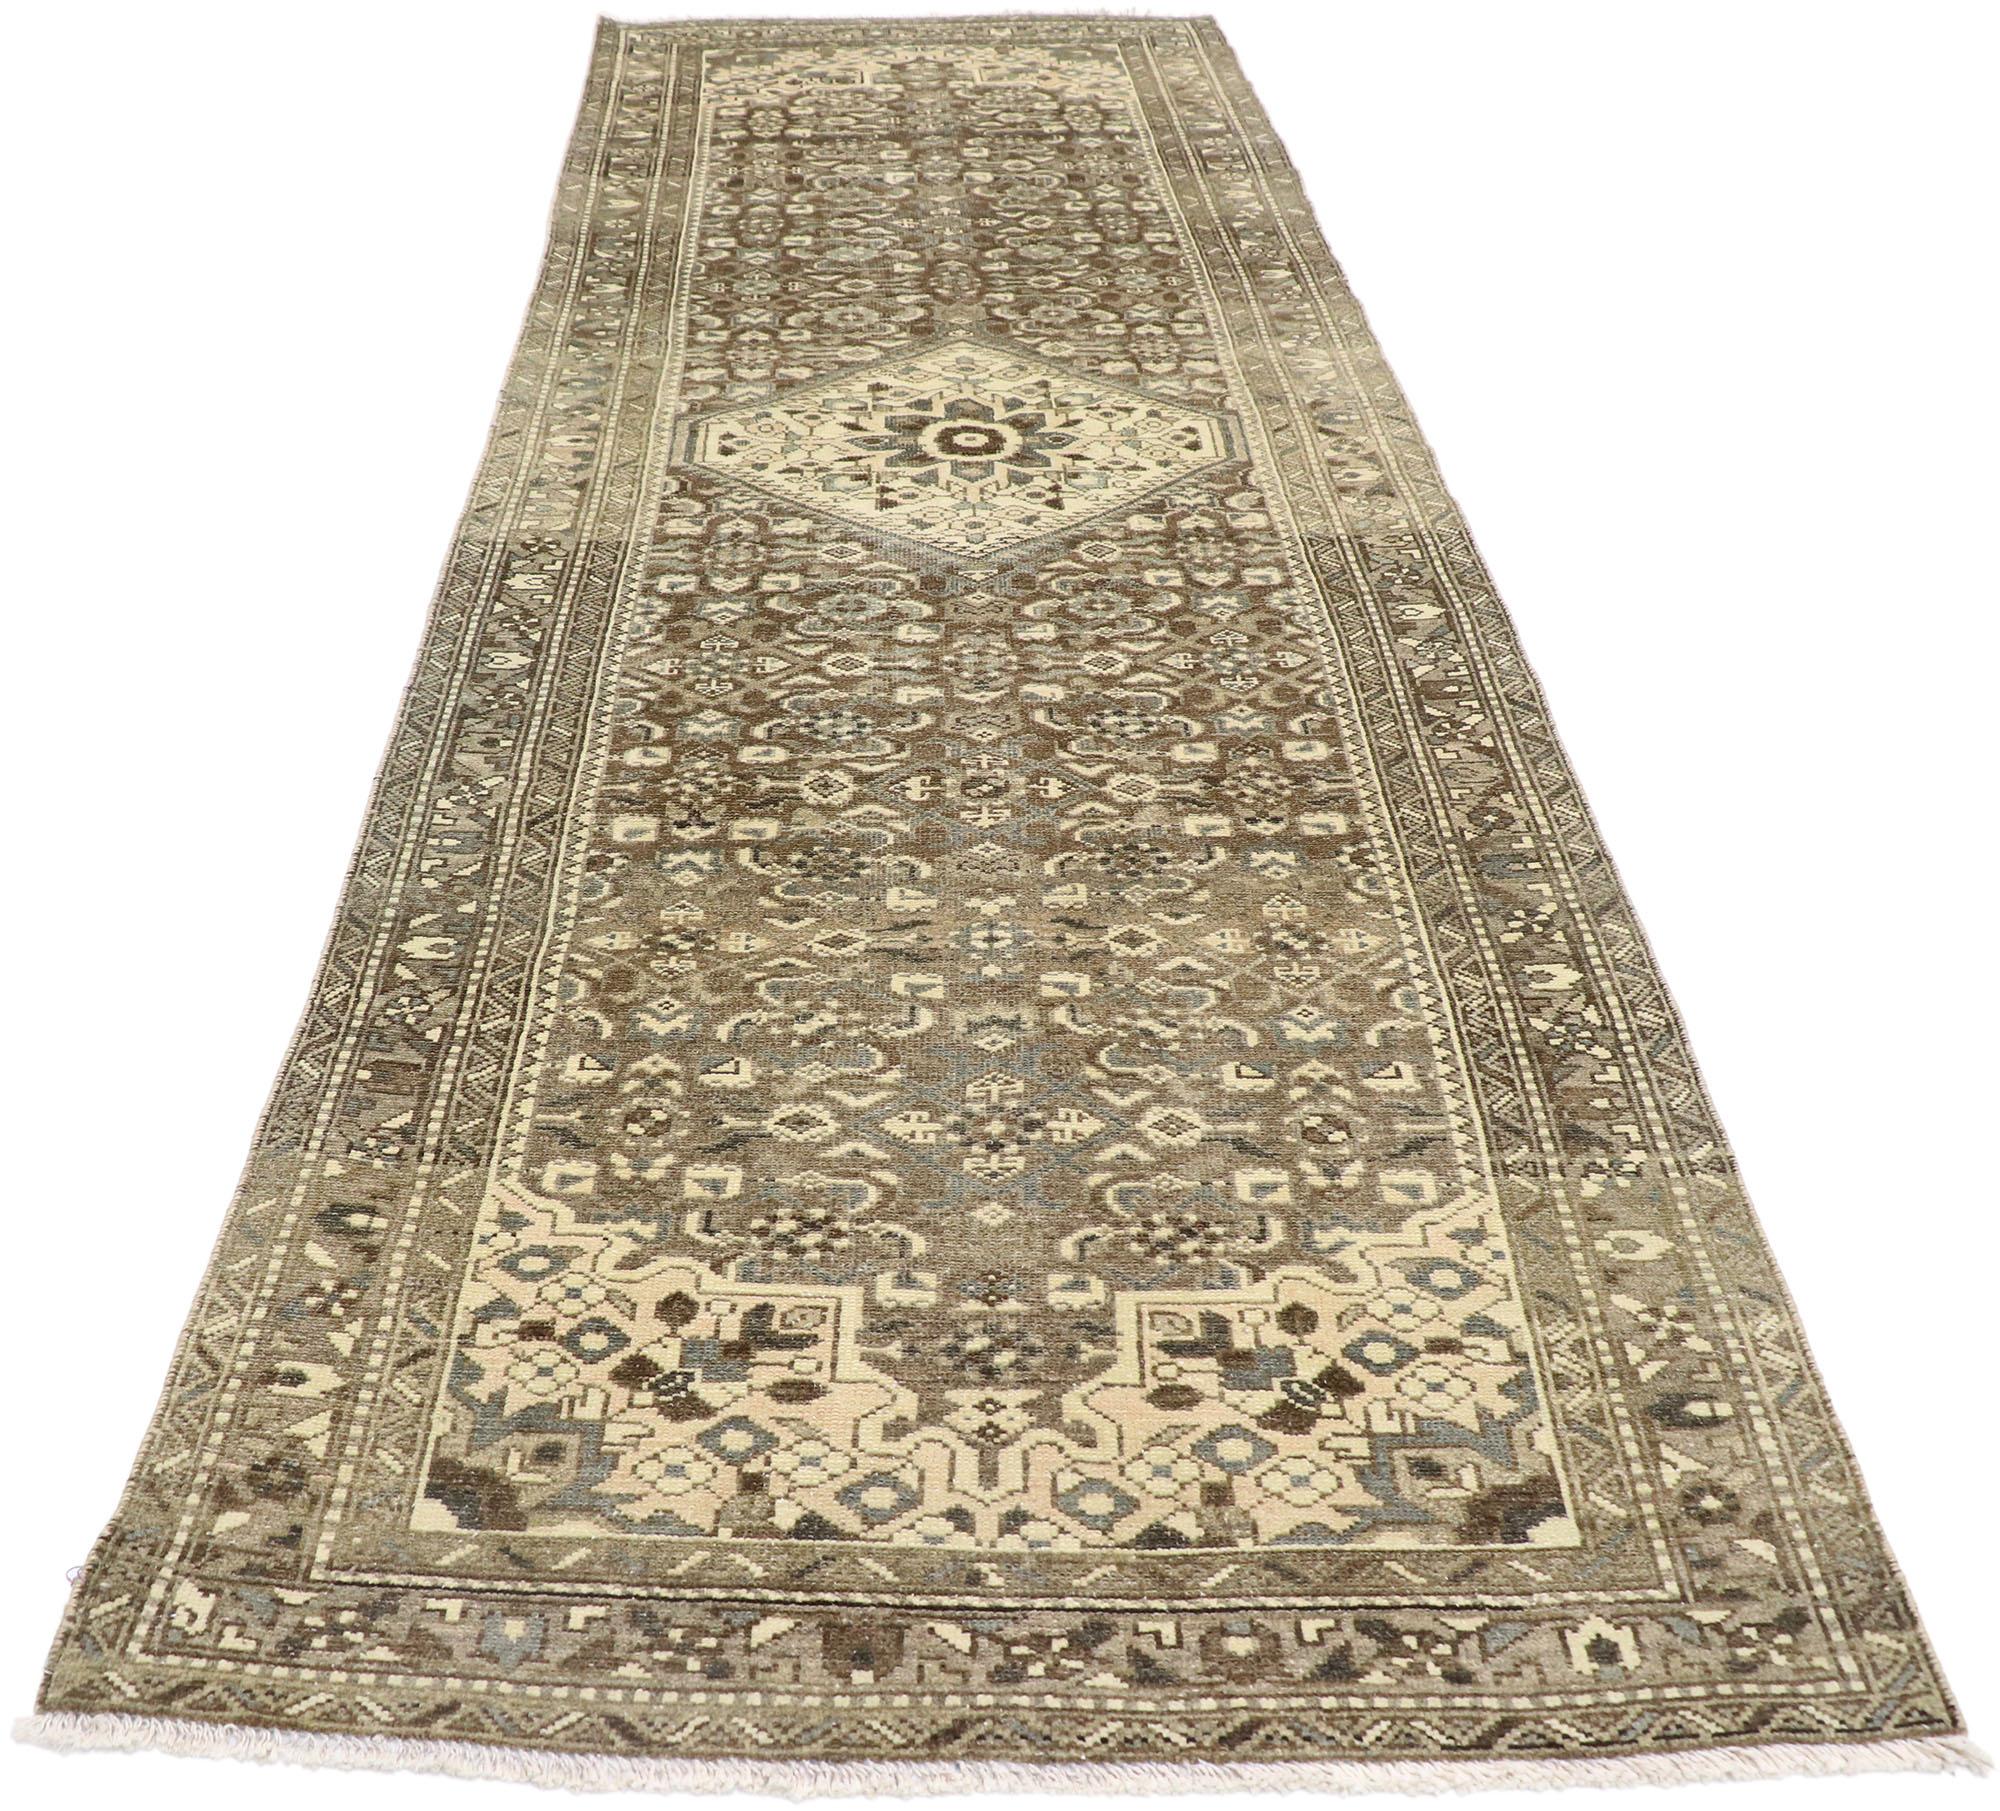 Malayer Distressed Antique Persian Mahal Runner with Modern Rustic Shaker Style For Sale